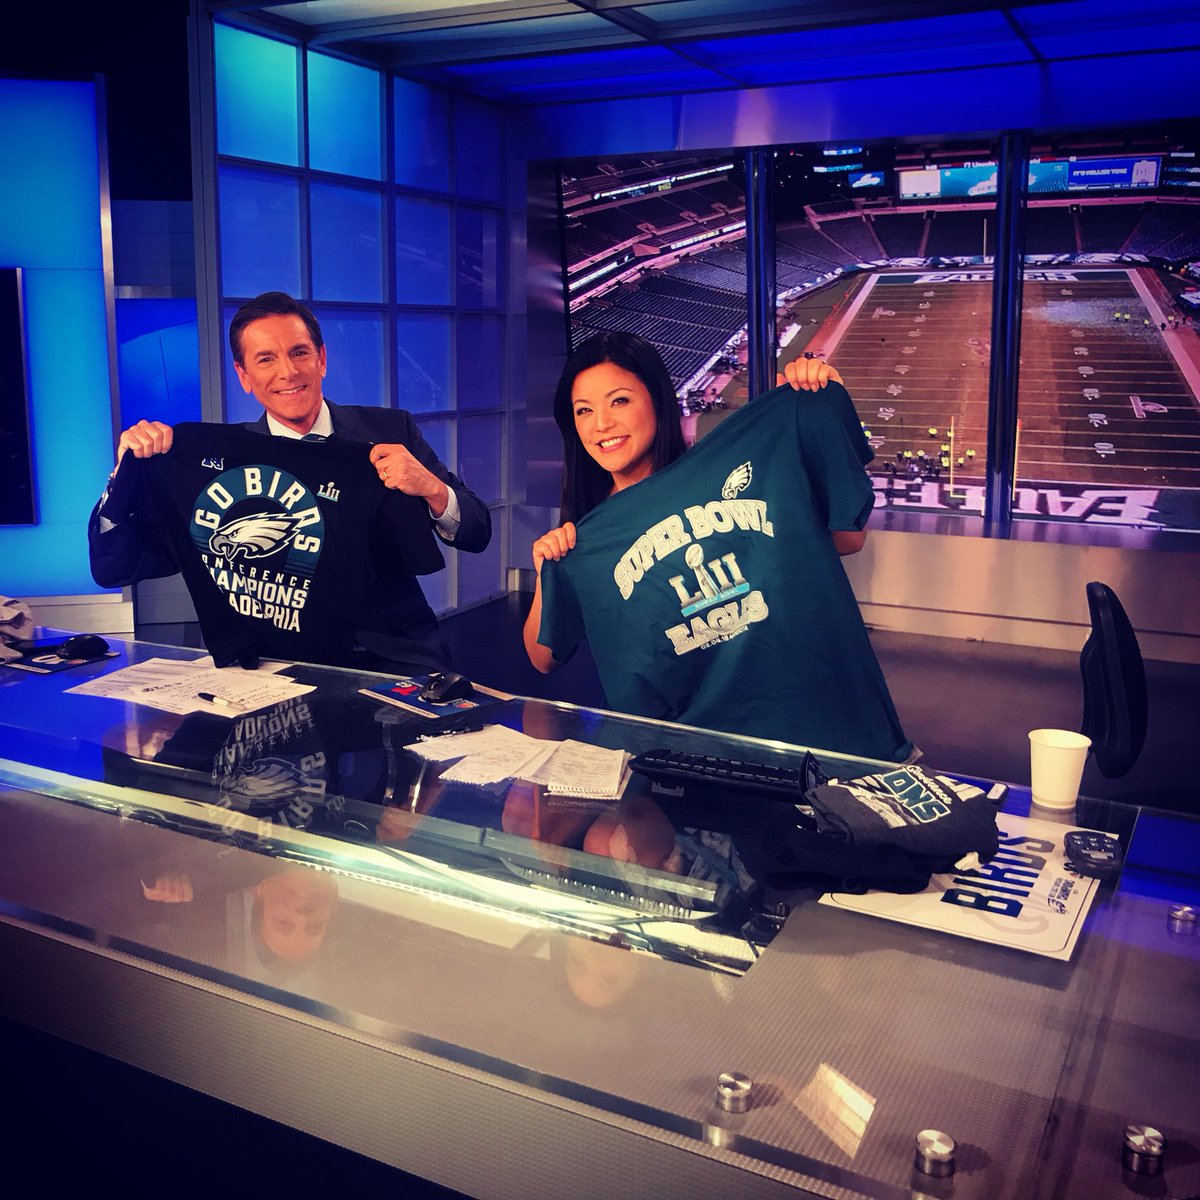 The @philadelphiaeagles victory fever has spilled over into the studio as the wave of excitement and joy floods the entire area! LIVE team coverage on @nbcphiladelphia! @jimrosenfield @DeniseNakanoTV